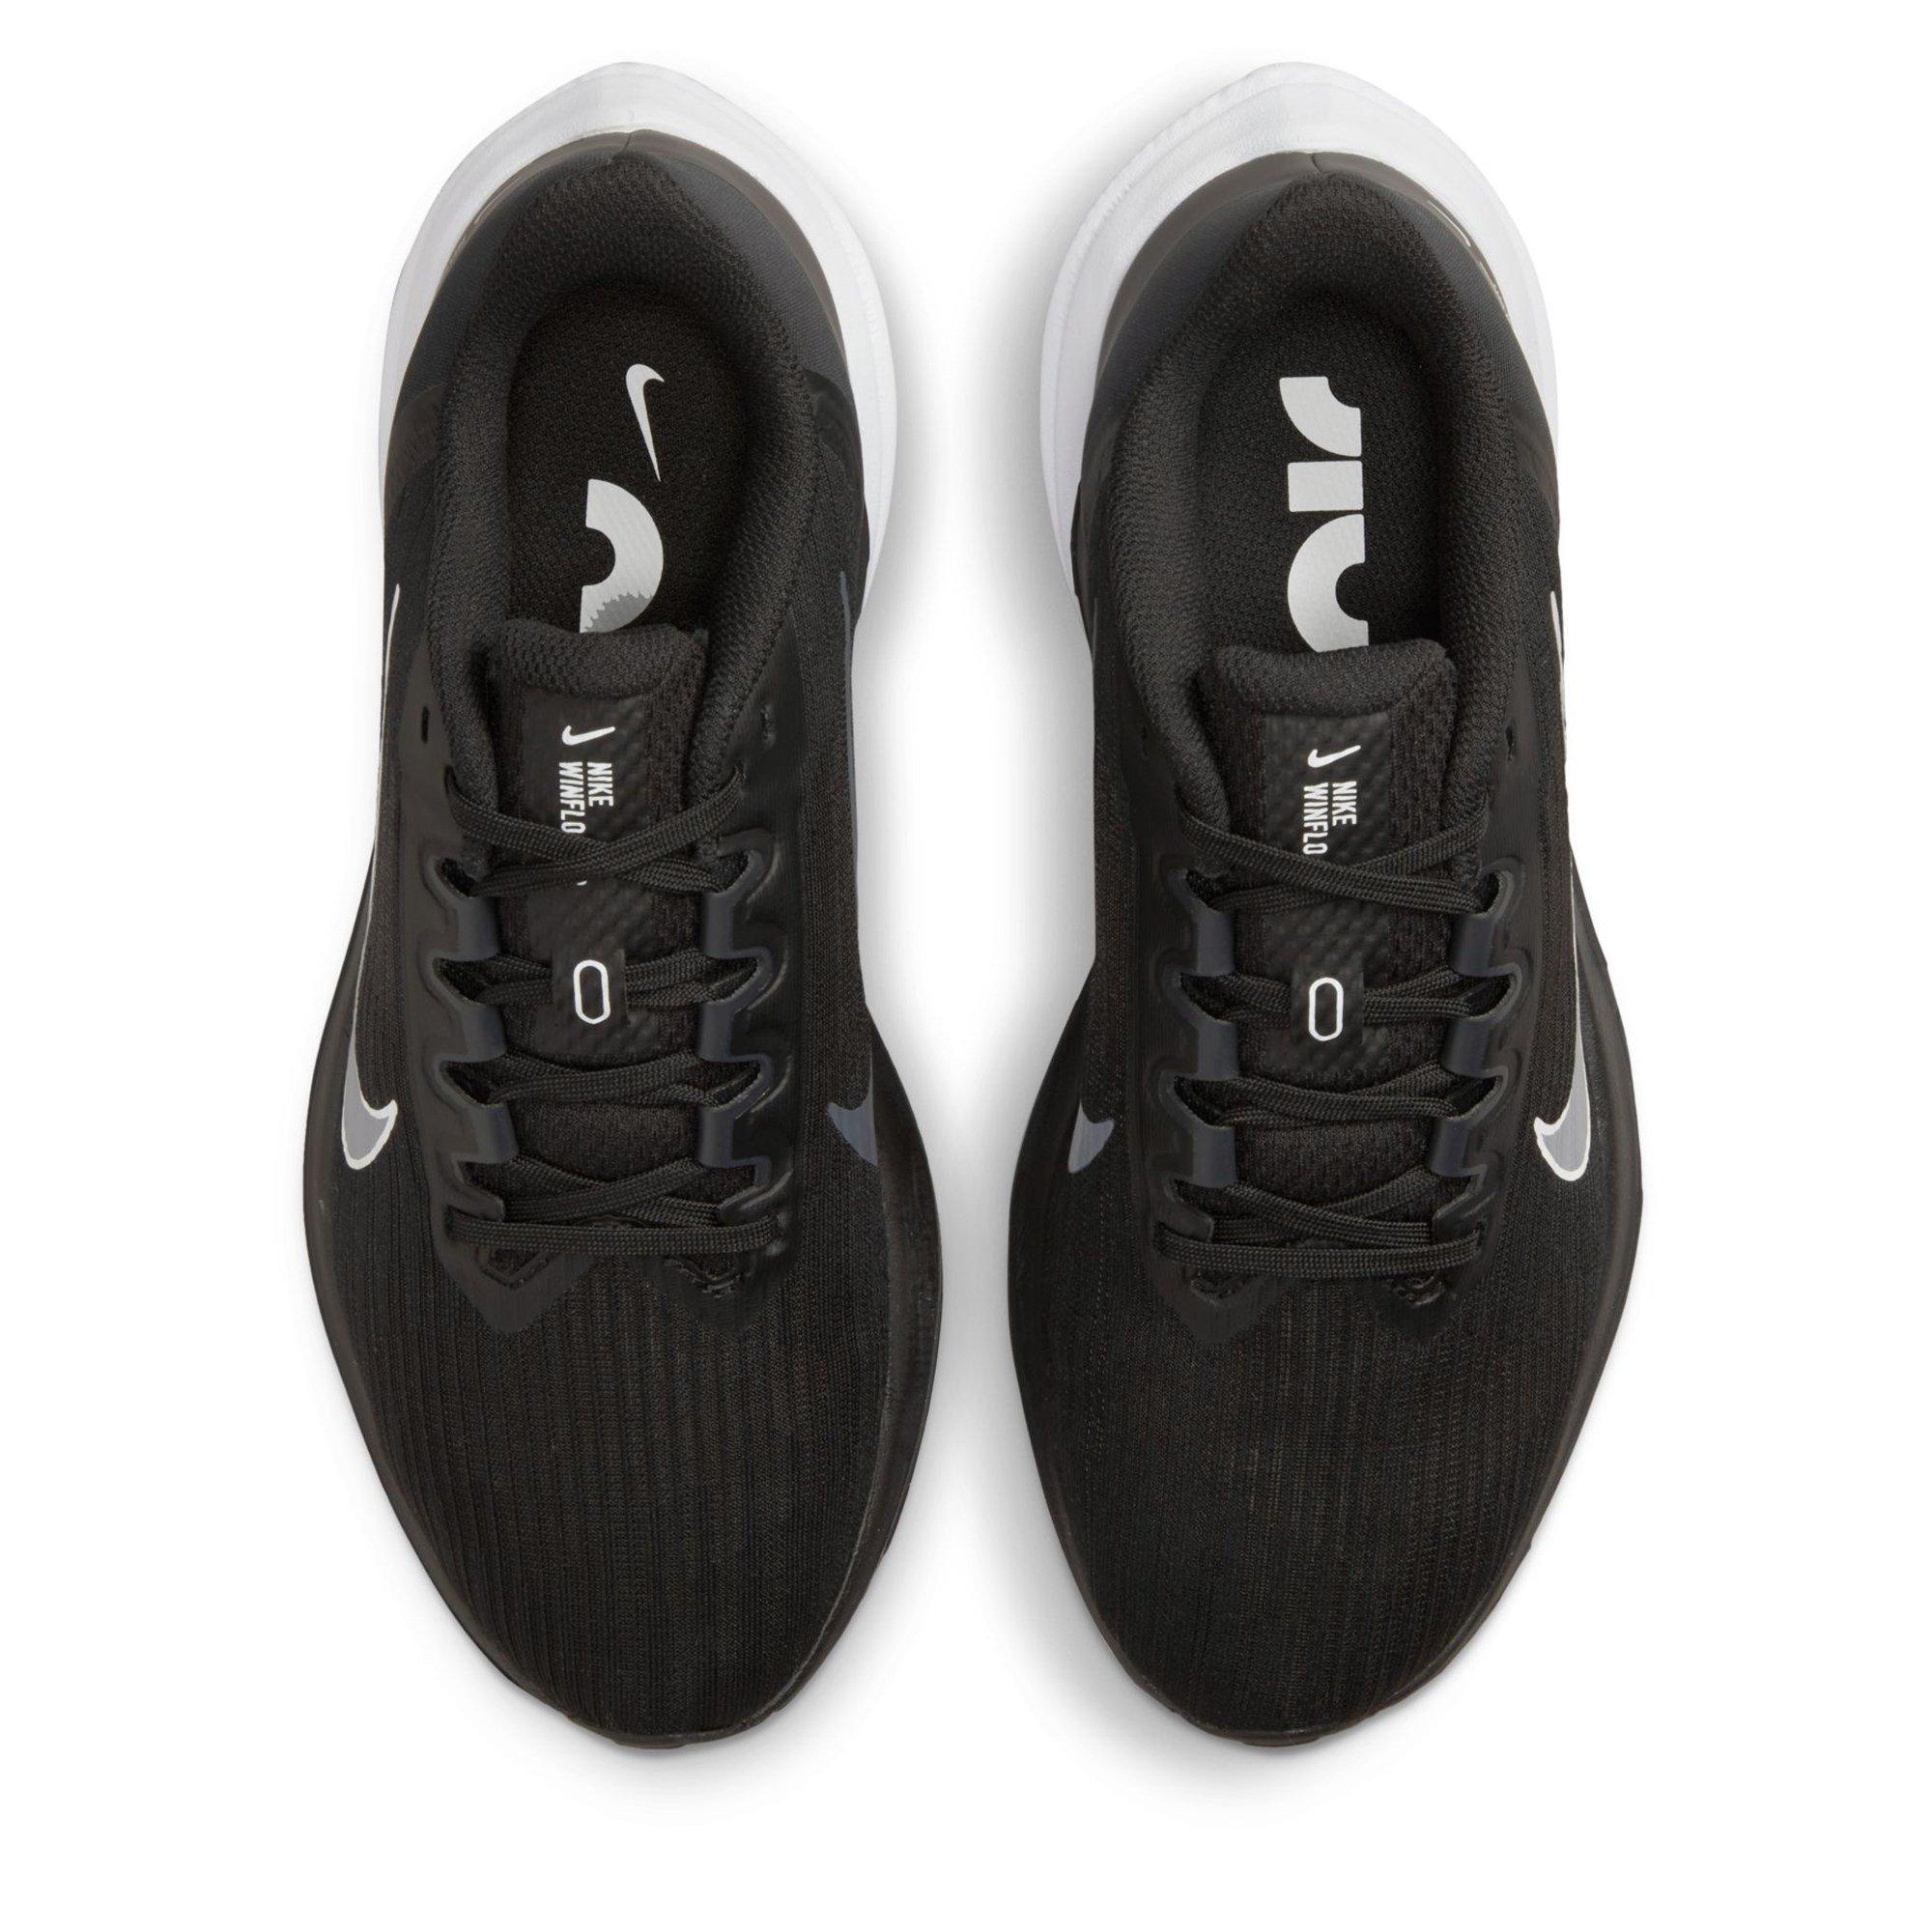 Nike | Air Winflo 9 Womens Running Shoes | Everyday Neutral Road ...